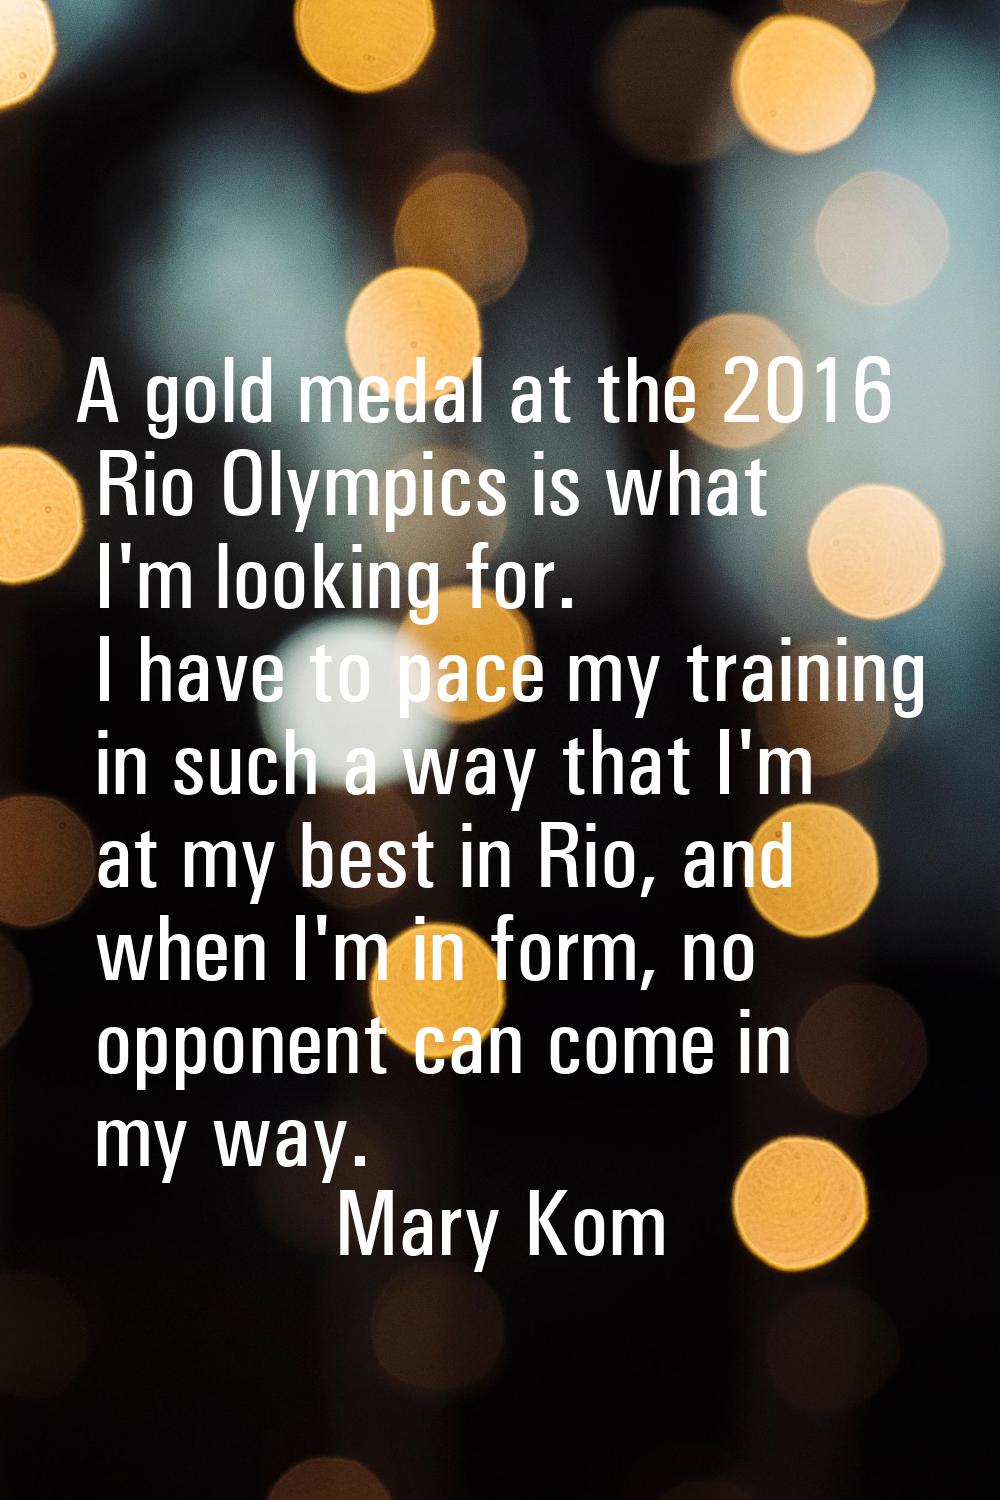 A gold medal at the 2016 Rio Olympics is what I'm looking for. I have to pace my training in such a